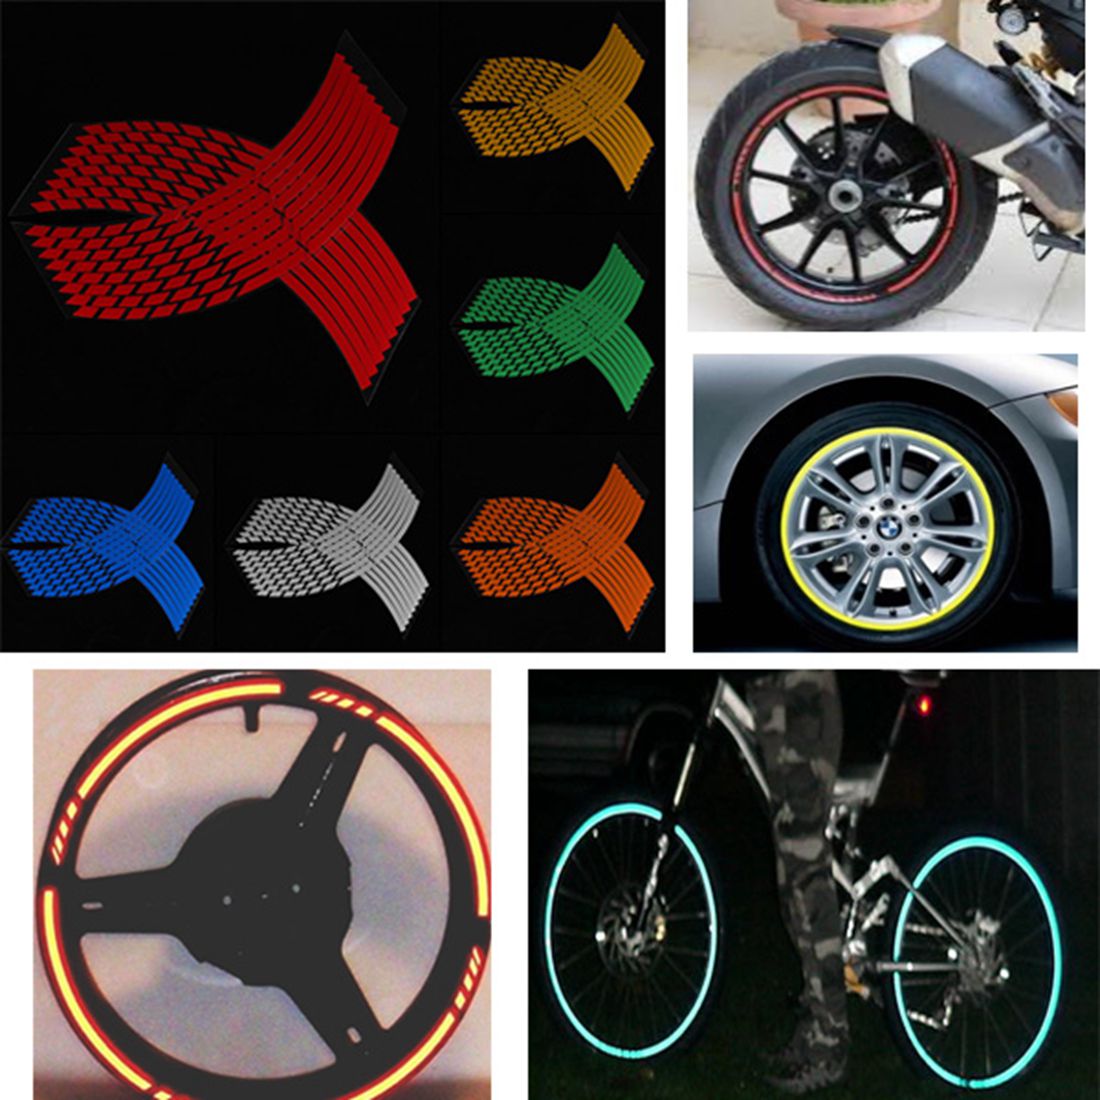 16-18-Inches-Wheel-Sticker-Reflective-Rim-Stripe-Decals-Tape-for-Car-Bike-Motorcycle-917038